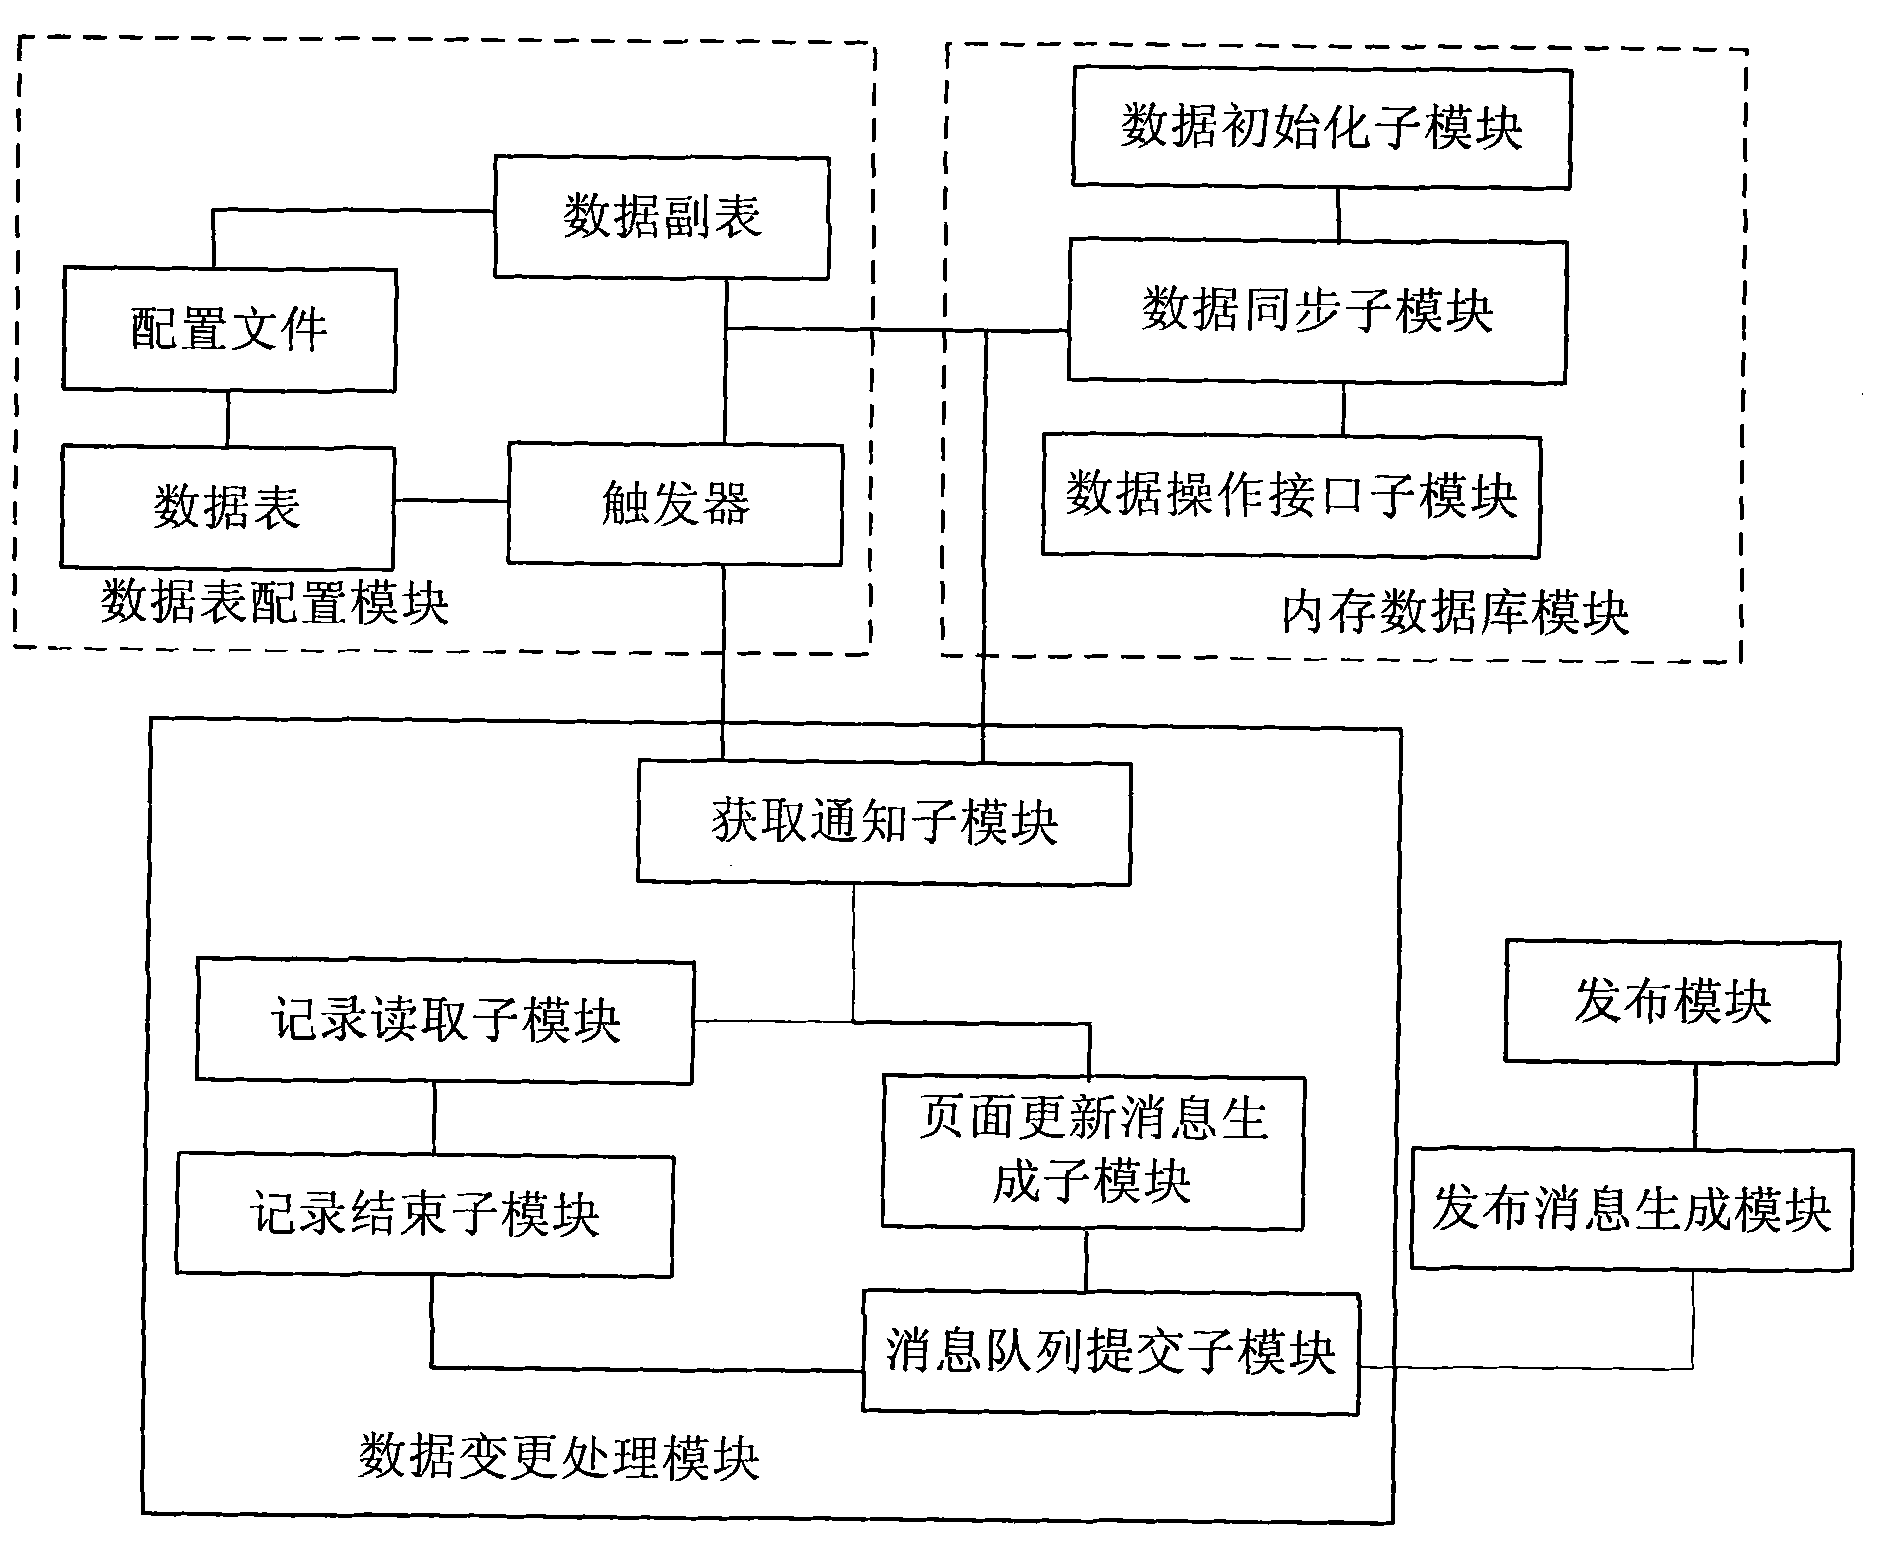 Method and system for network upgrade real-time release